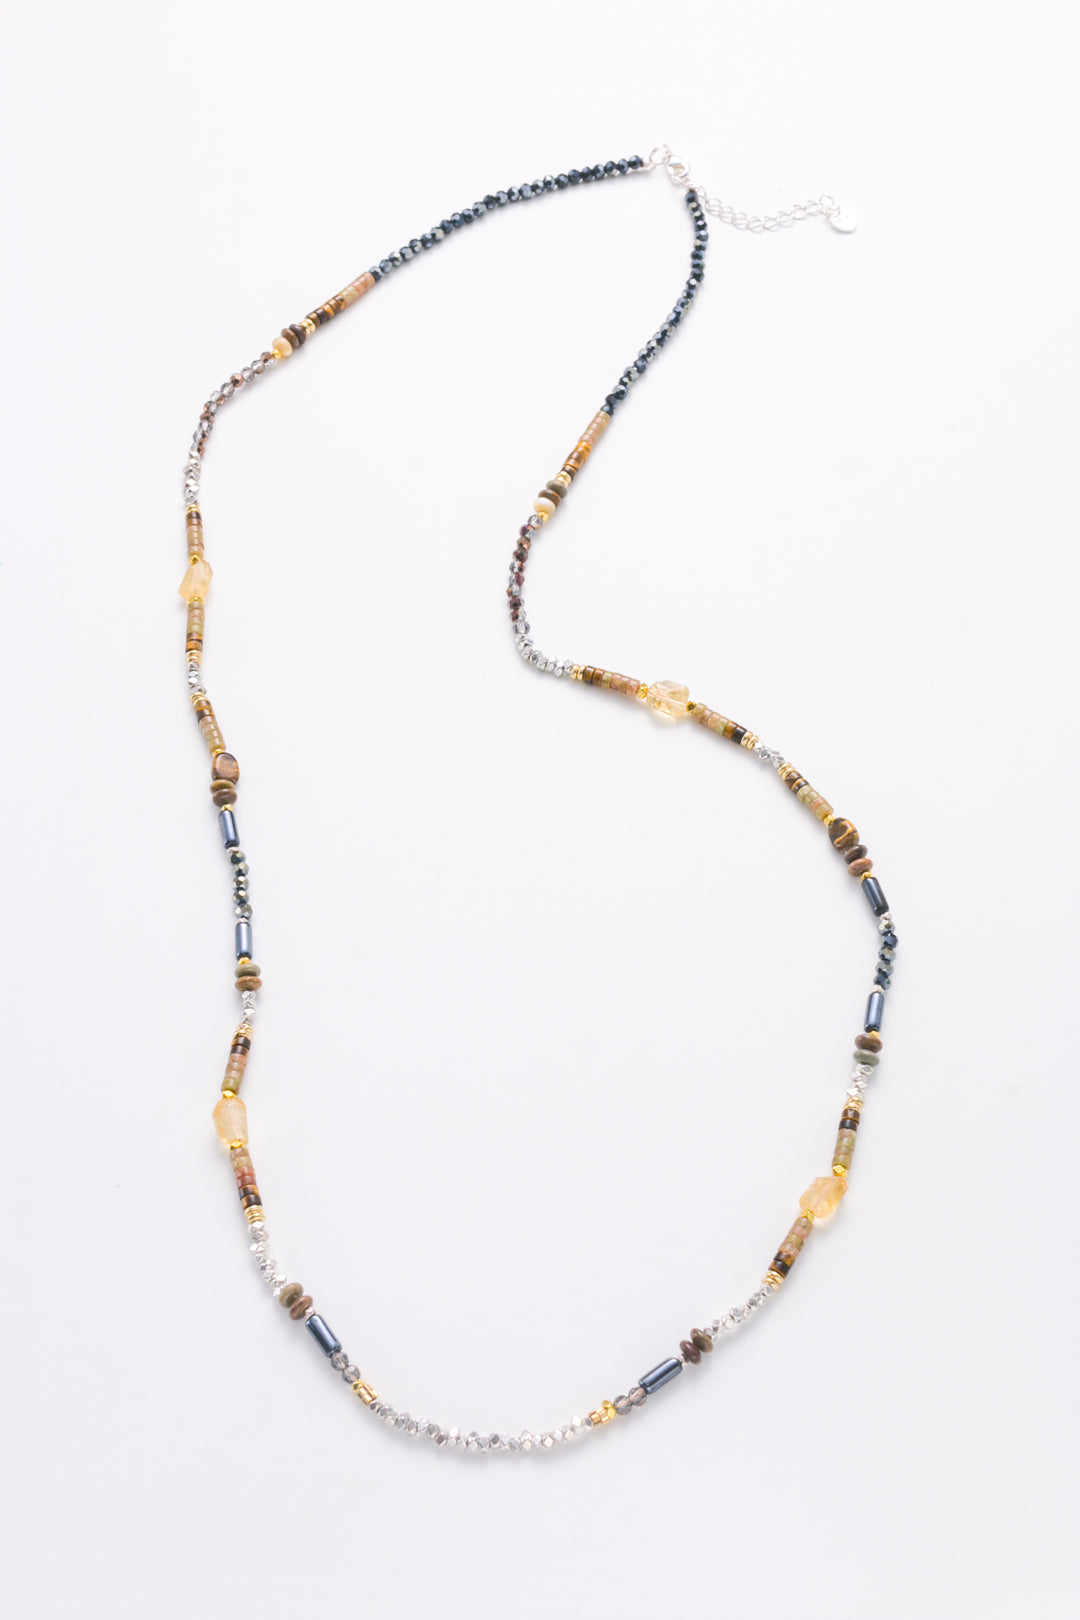 NATURAL MIX LONG BEADED NECKLACE - Kingfisher Road - Online Boutique